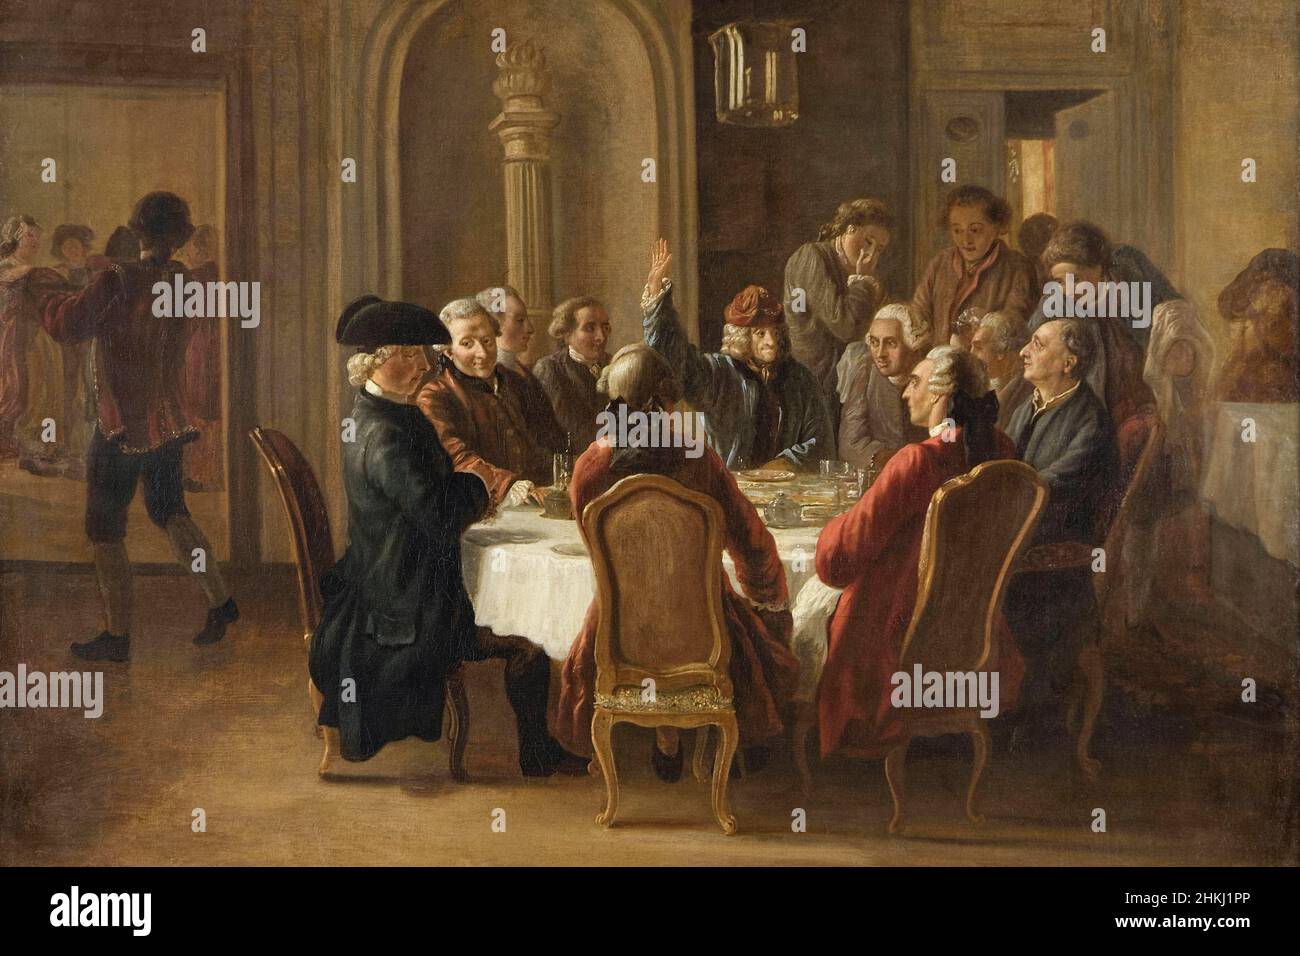 The Dinner of Philosophers by Swiss artist Jean Huber (1721-1786) painted 1772-73 showing  Diderot, Huber-Voltaire,  Marmontel, Voltaire, Alembert, La Harpe, Grimm, Father Adam and Condorcet. Stock Photo